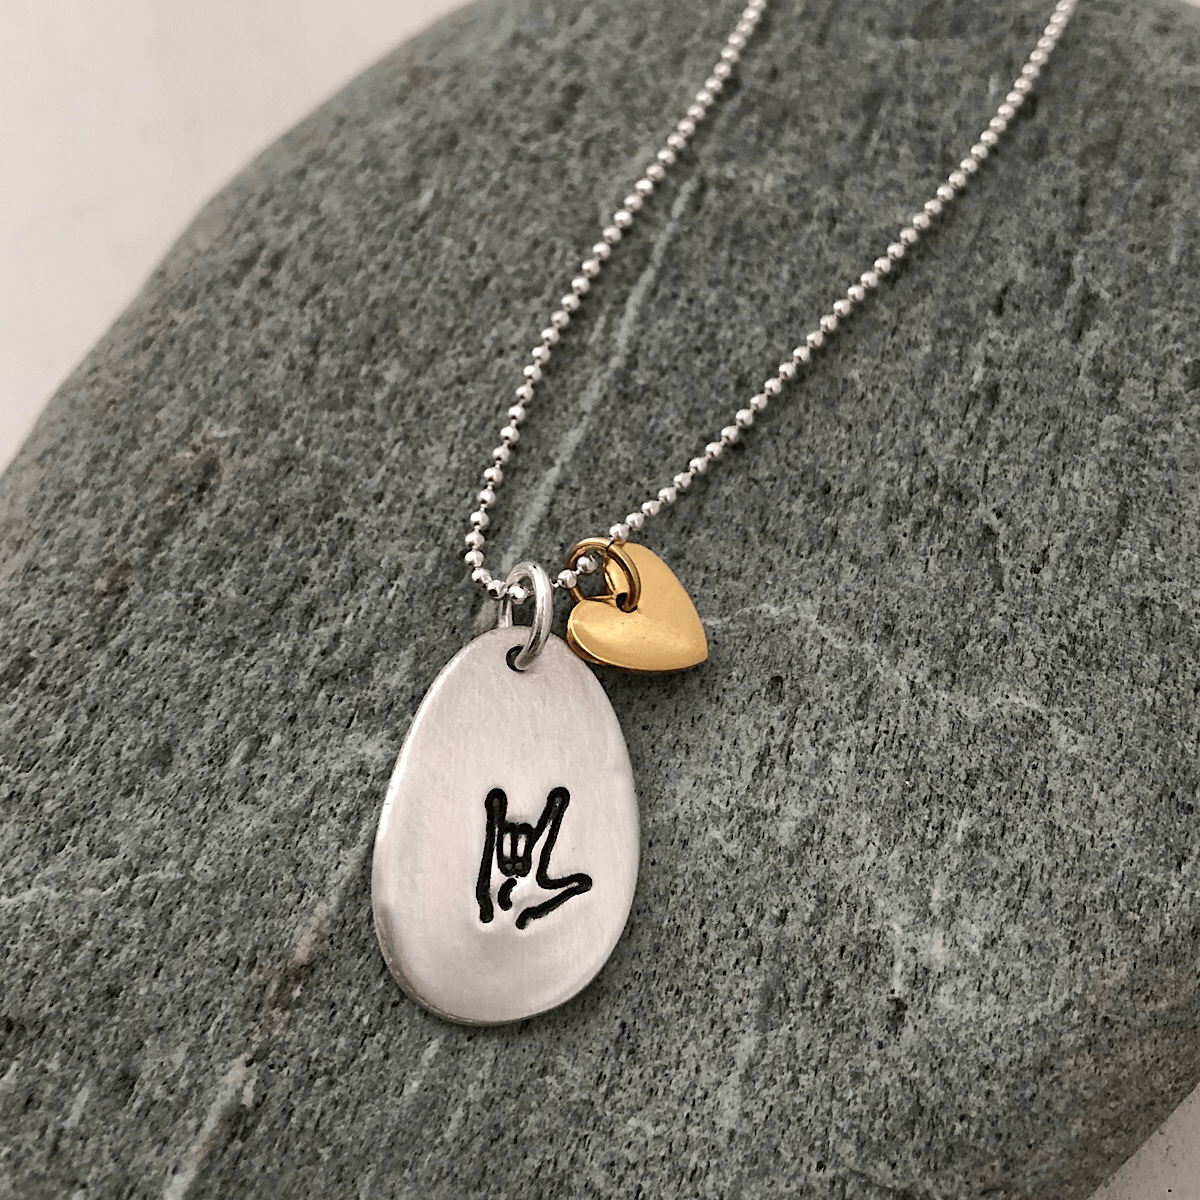 I Love You Pebble Necklace - IsabelleGraceJewelry